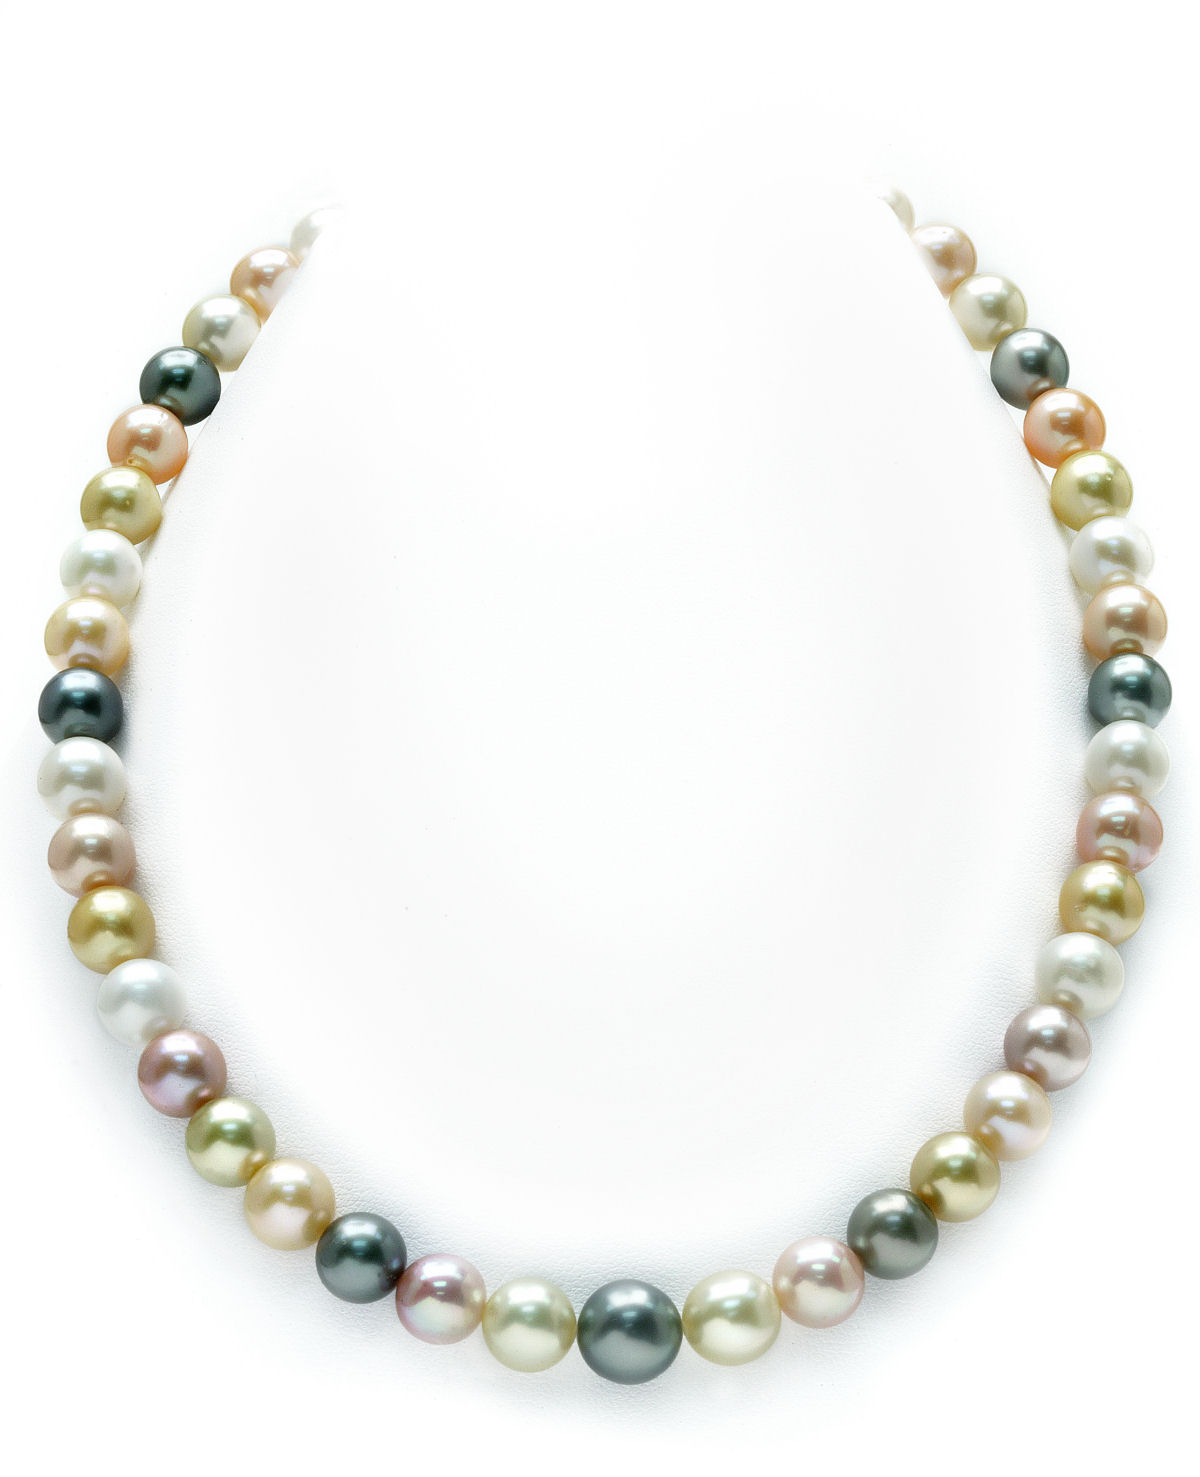 8-10mm South Sea & Freshwater Multicolor Pastel Pearl Necklace - AAA Quality